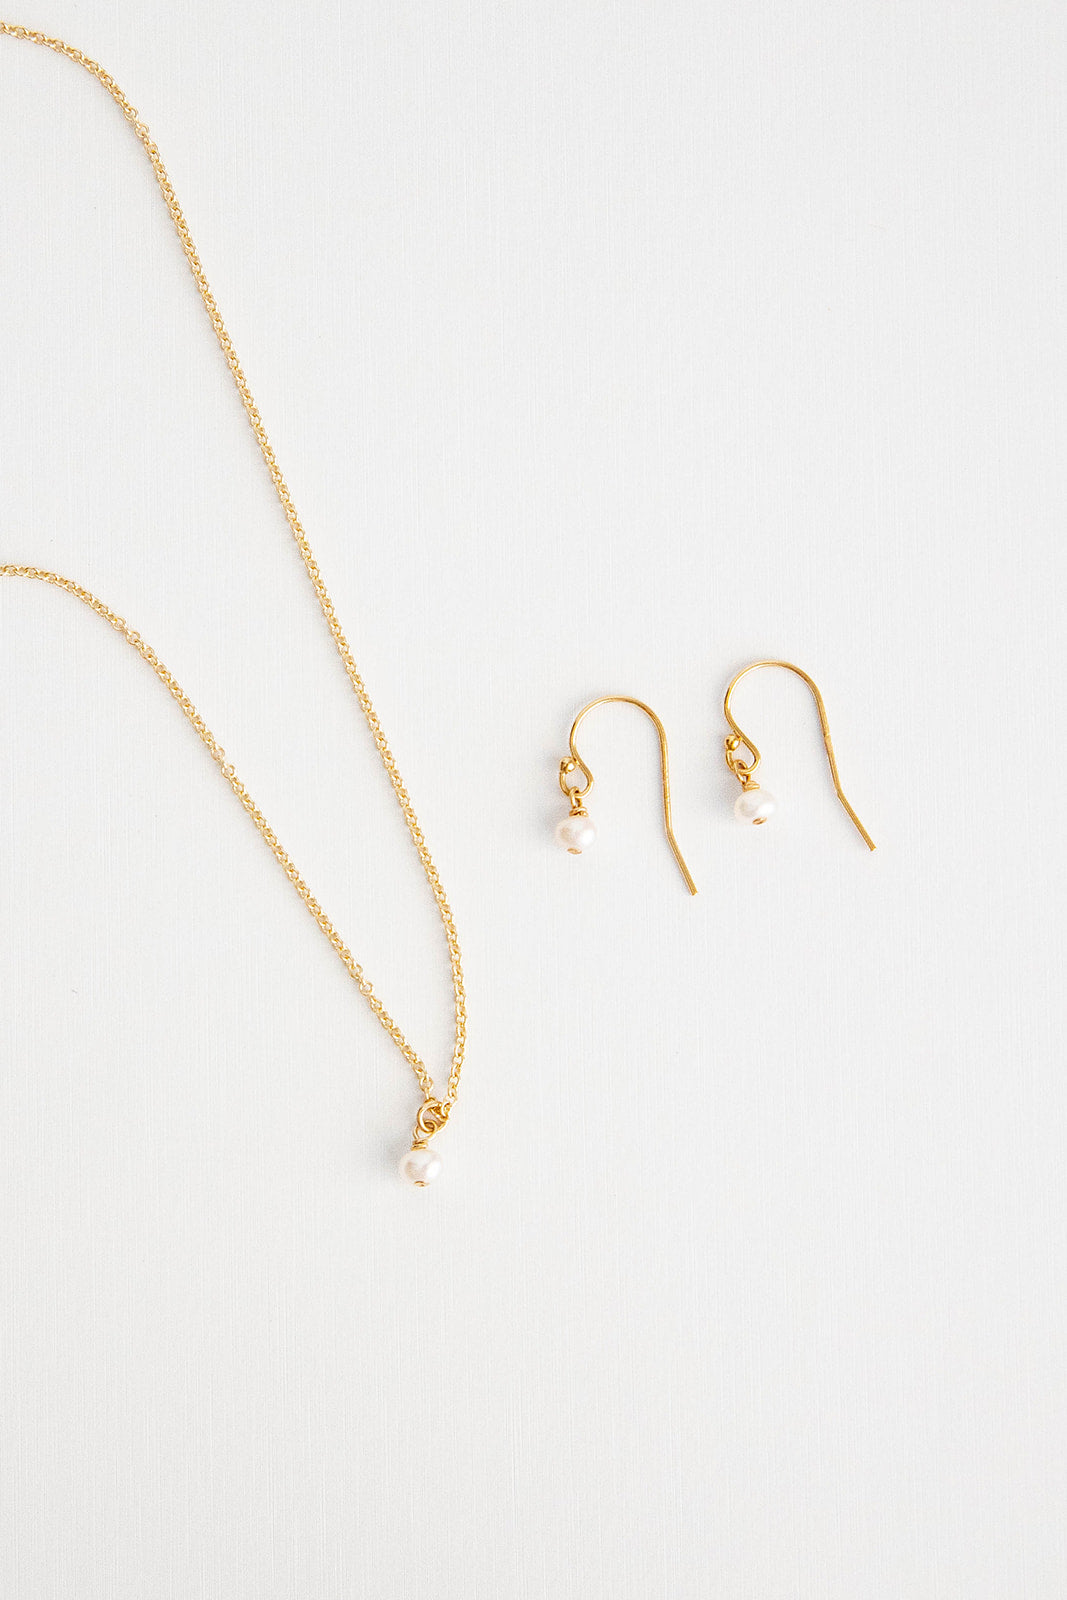 A pair of mini pearl earrings hung on shepherd’s hooks lay on a white background flatlay with matching necklace.